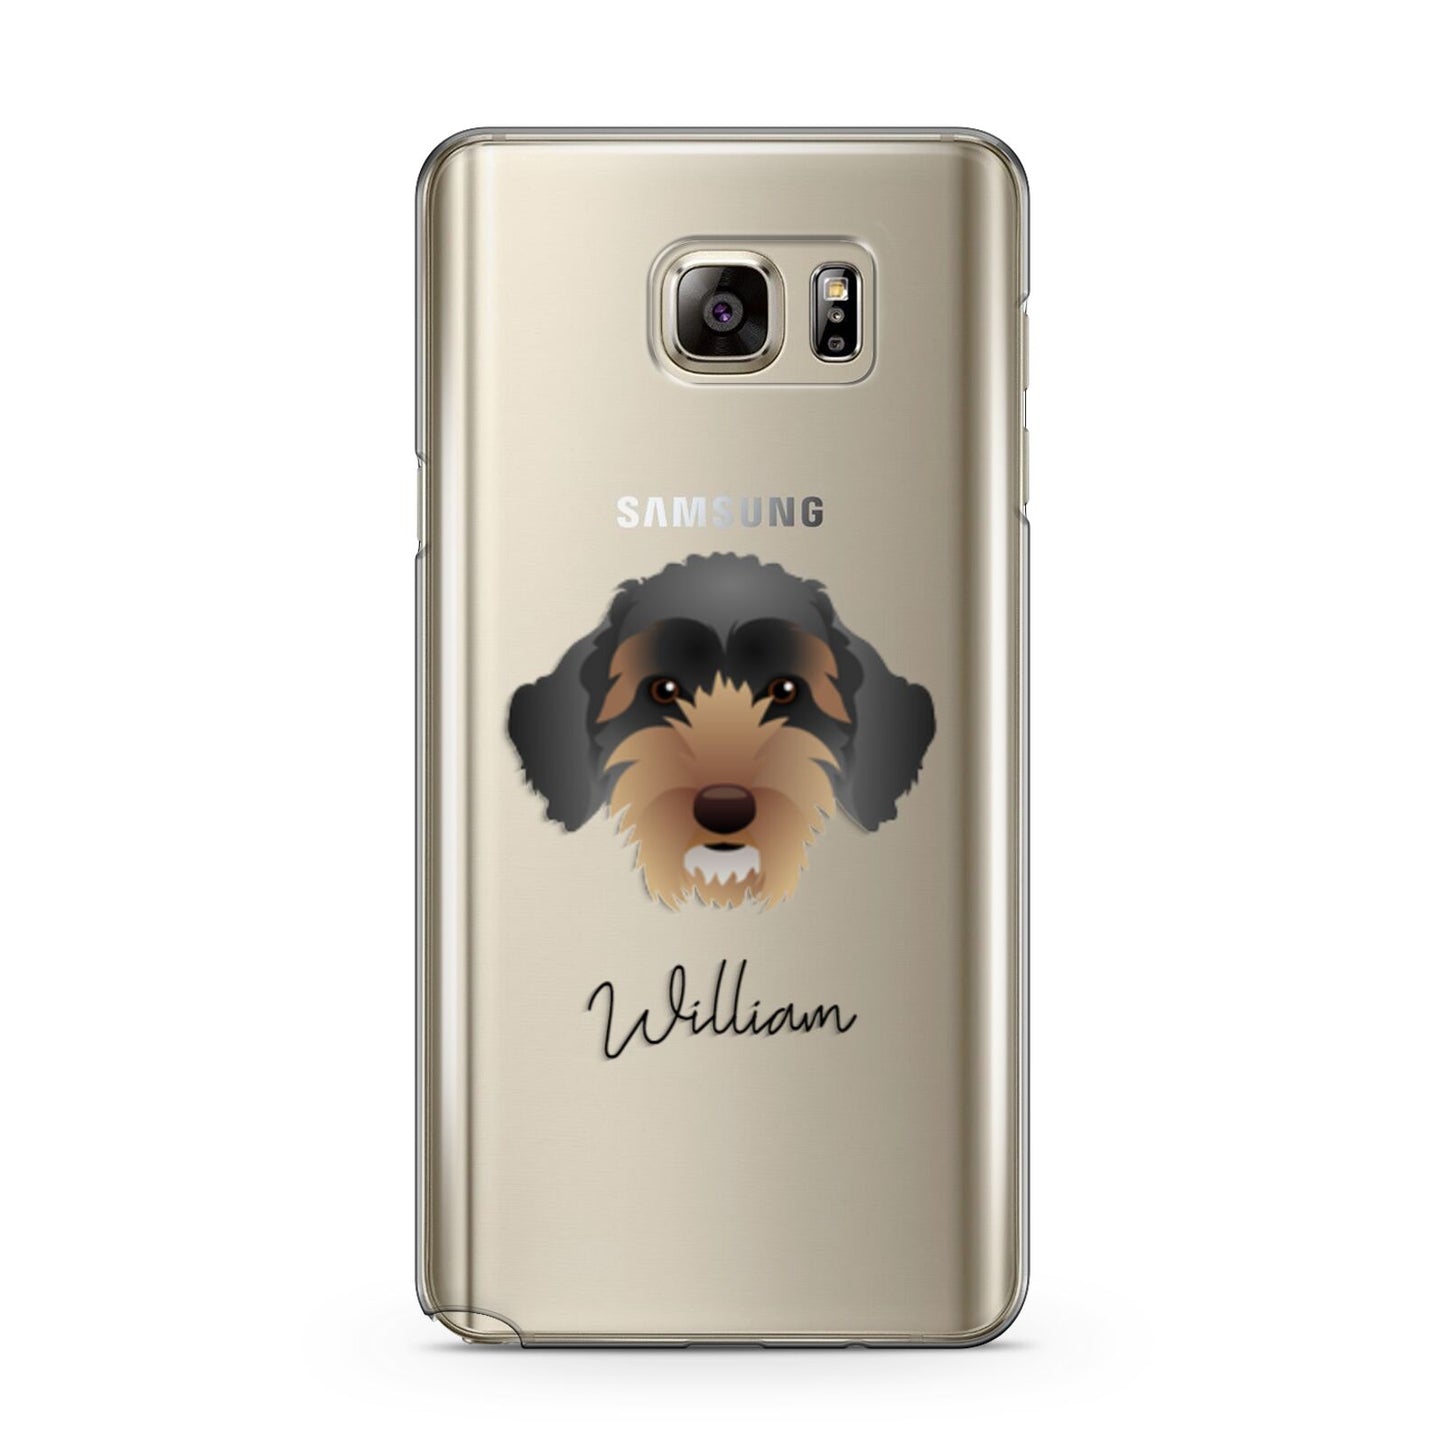 Sproodle Personalised Samsung Galaxy Note 5 Case